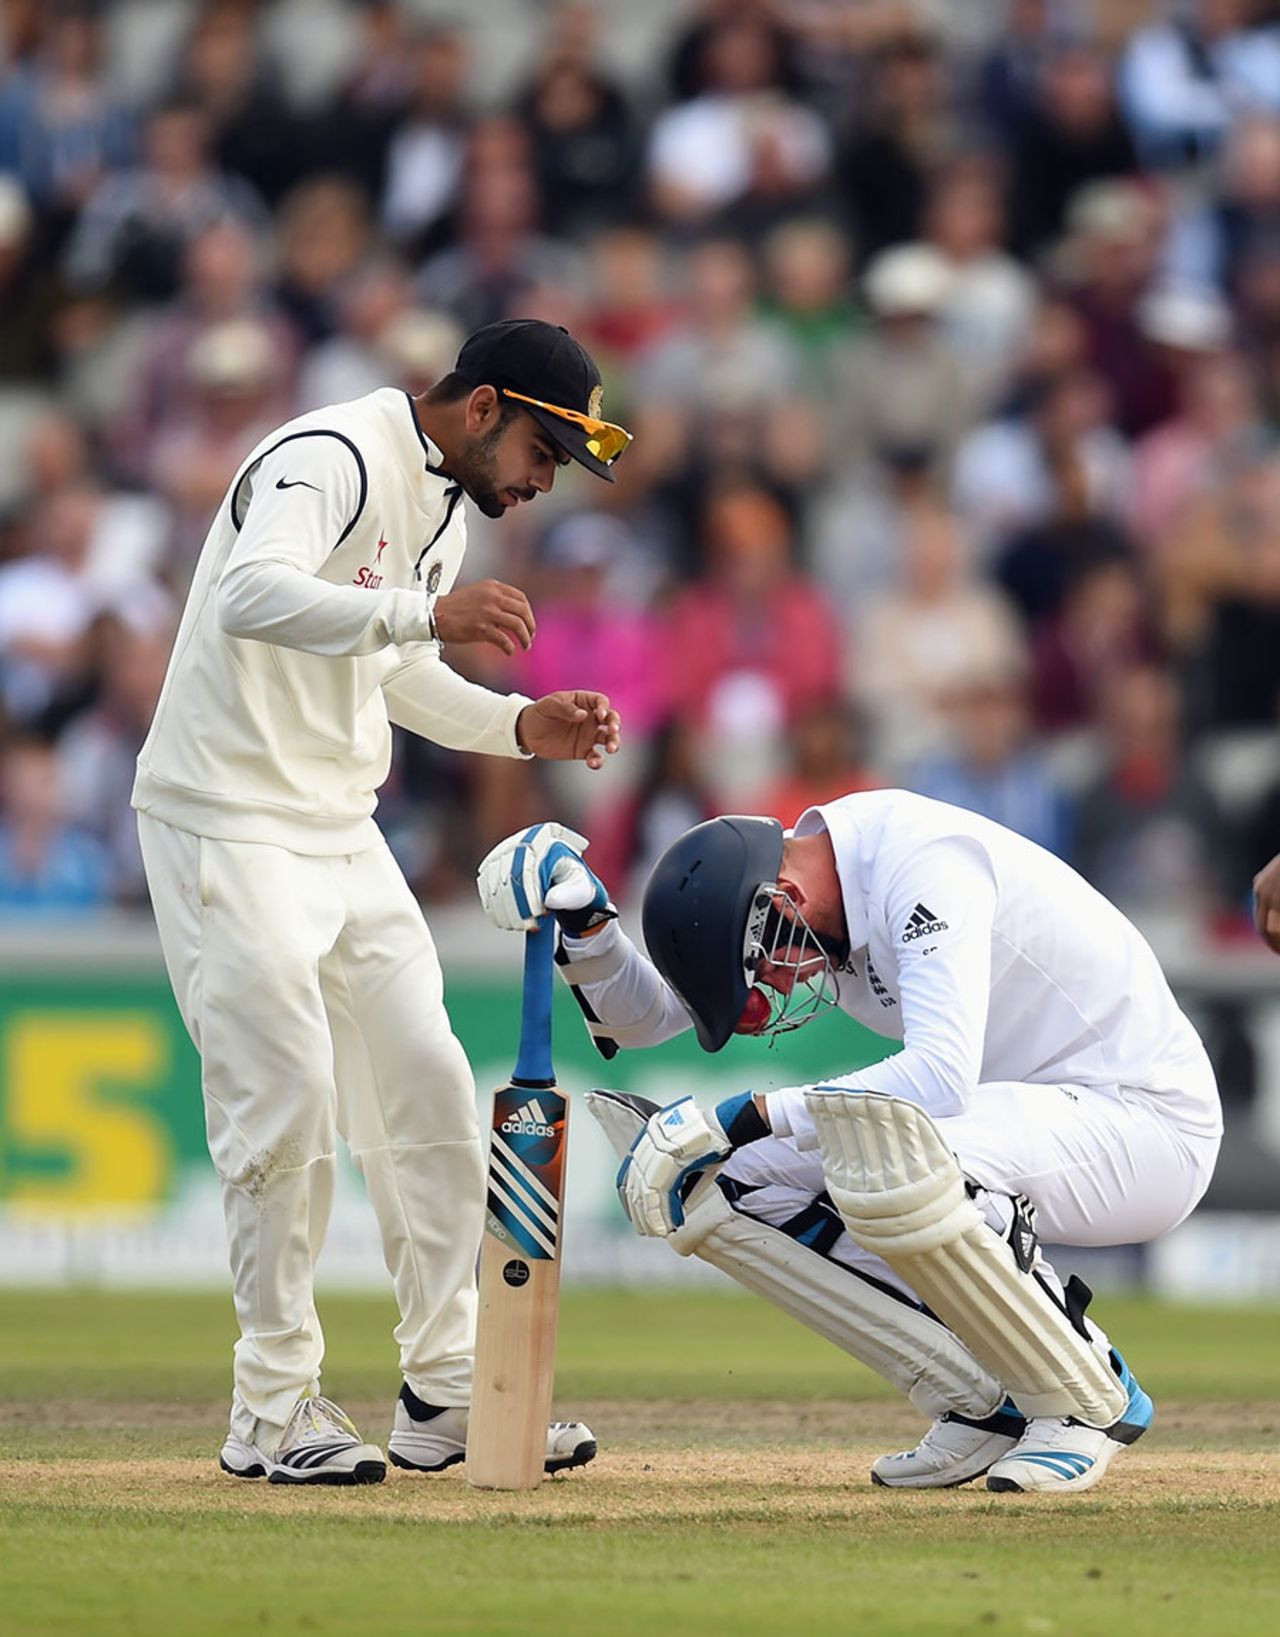 A concerned Virat Kohli rushes up to Stuart Broad after a Varun Aaron bouncer sneaked between the grille and peak of his helmet, England v India, 4th Test, Old Trafford, 3rd day, August 9, 2014